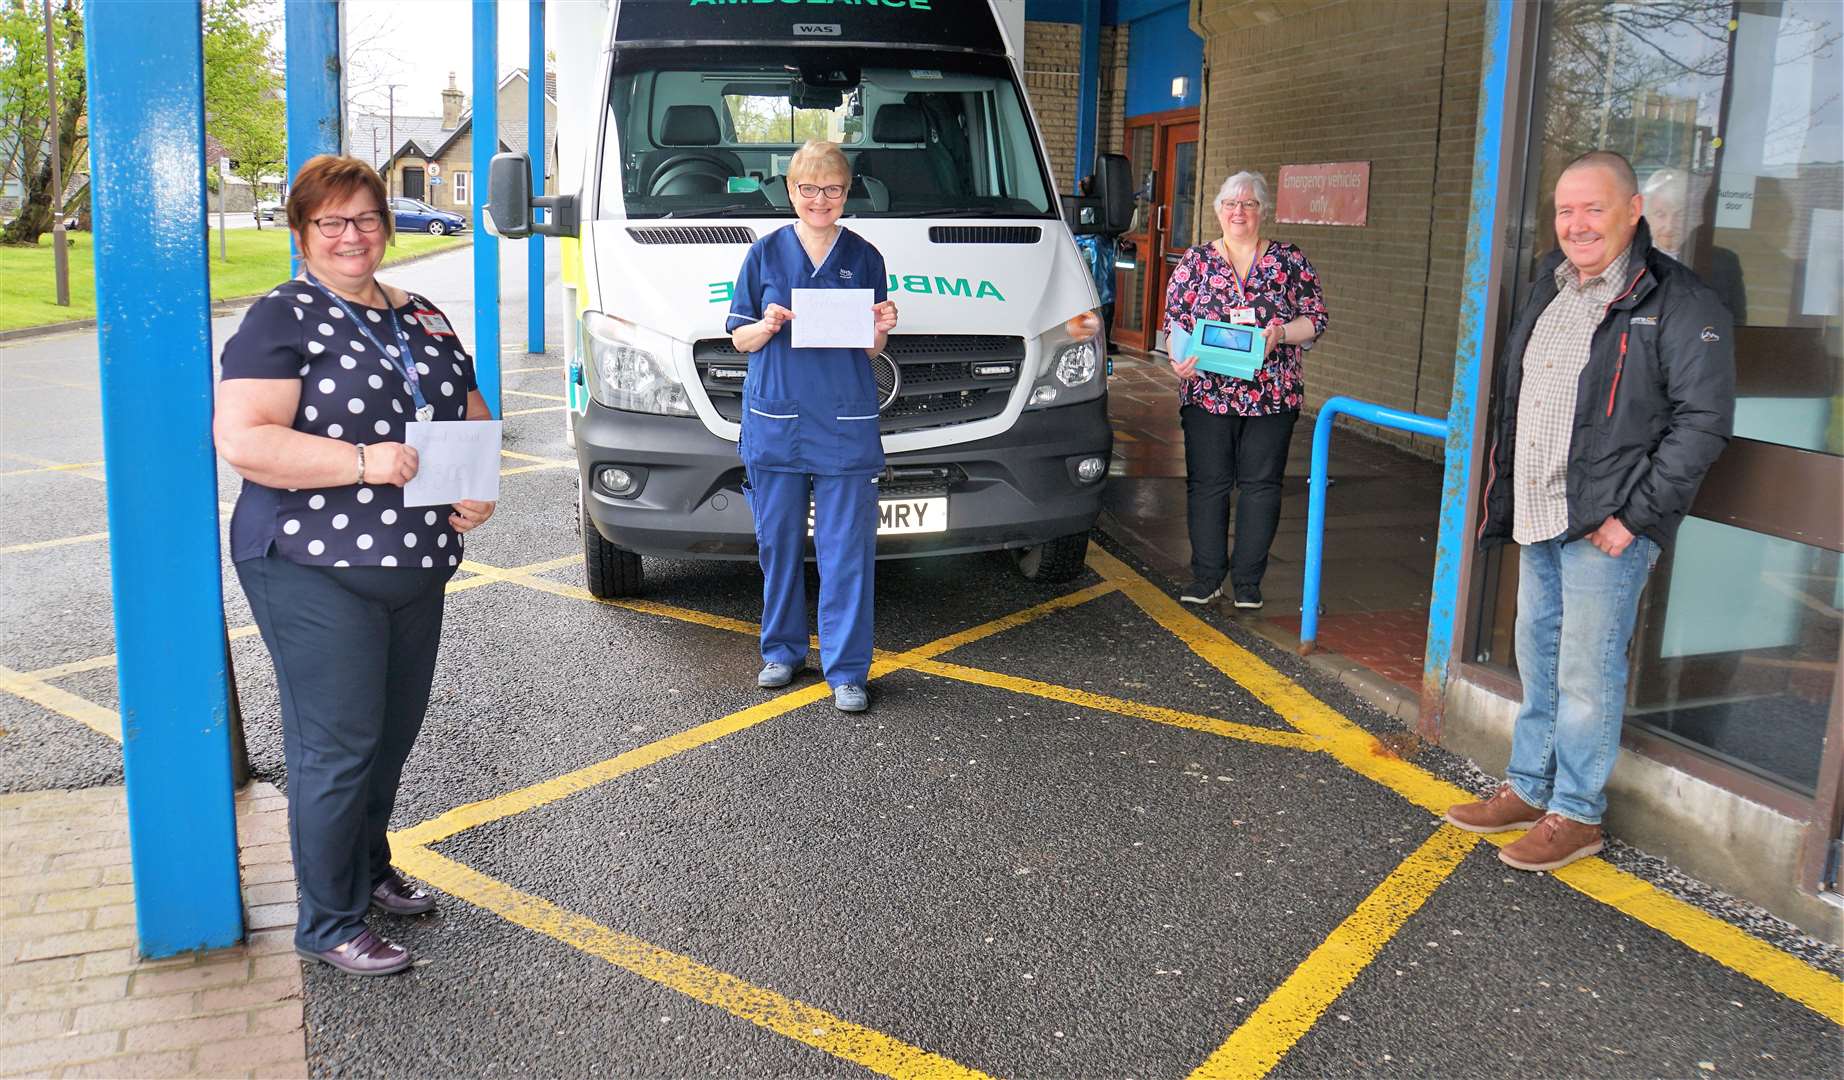 From left, NHS area support manager Kay Allan, senior charge nurse (Rosebank Wing) Pat McGee, Kay Henderson, nursing admin at the hospital, and Dennis Miller who donated the cash and tablets. Picture: DGS